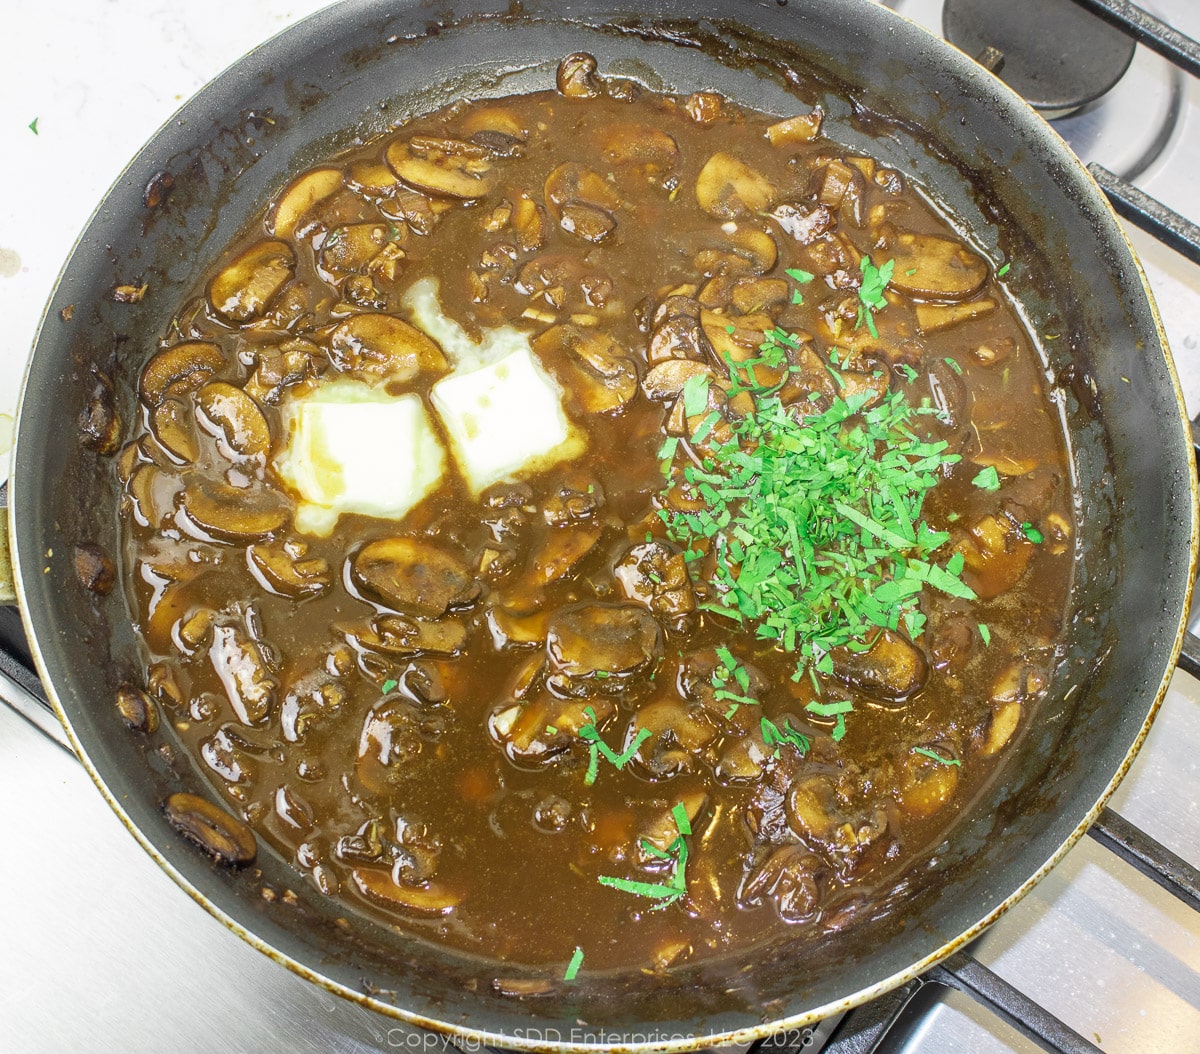 butter and parsley added to mushroom gravy in a frying pan